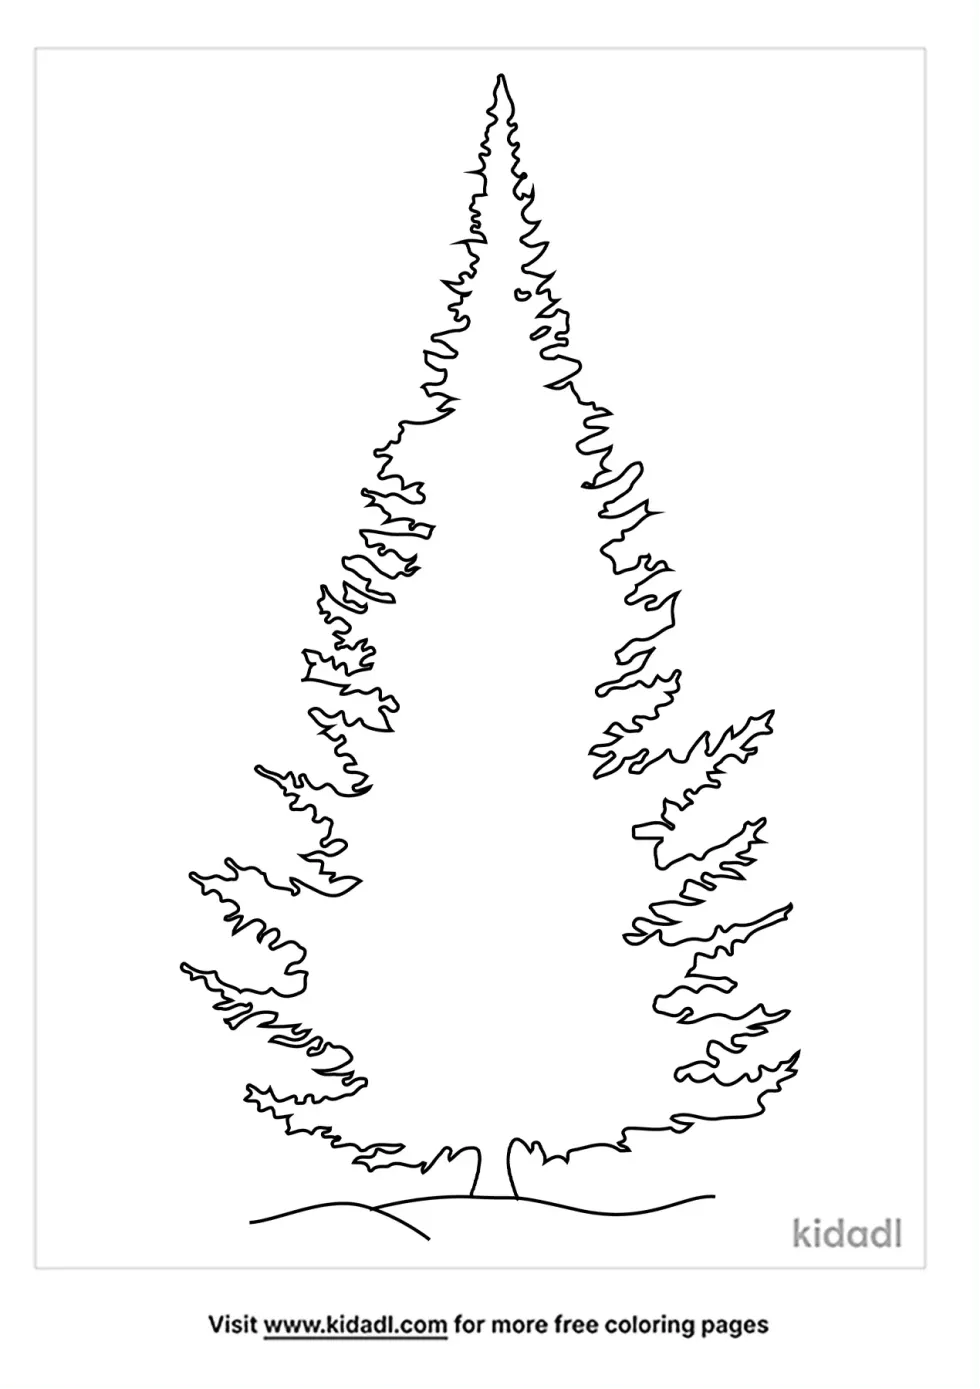 Balsam Fir Coloring Page